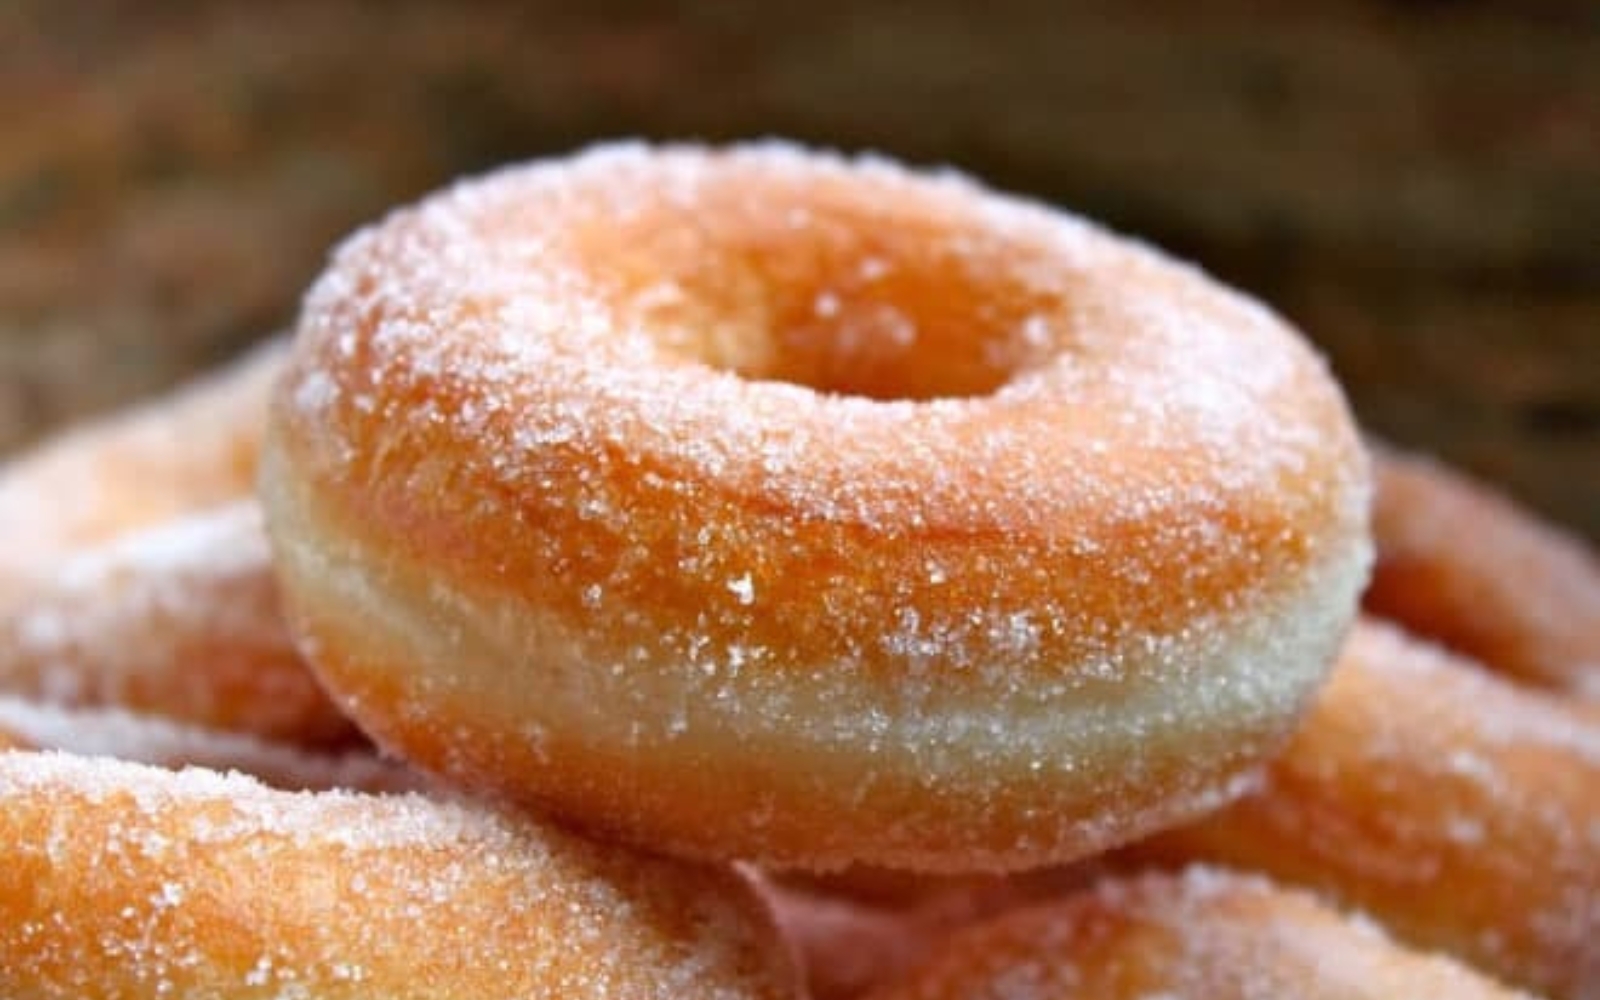 a simple yeast donut, lightly covered with sanding sugar